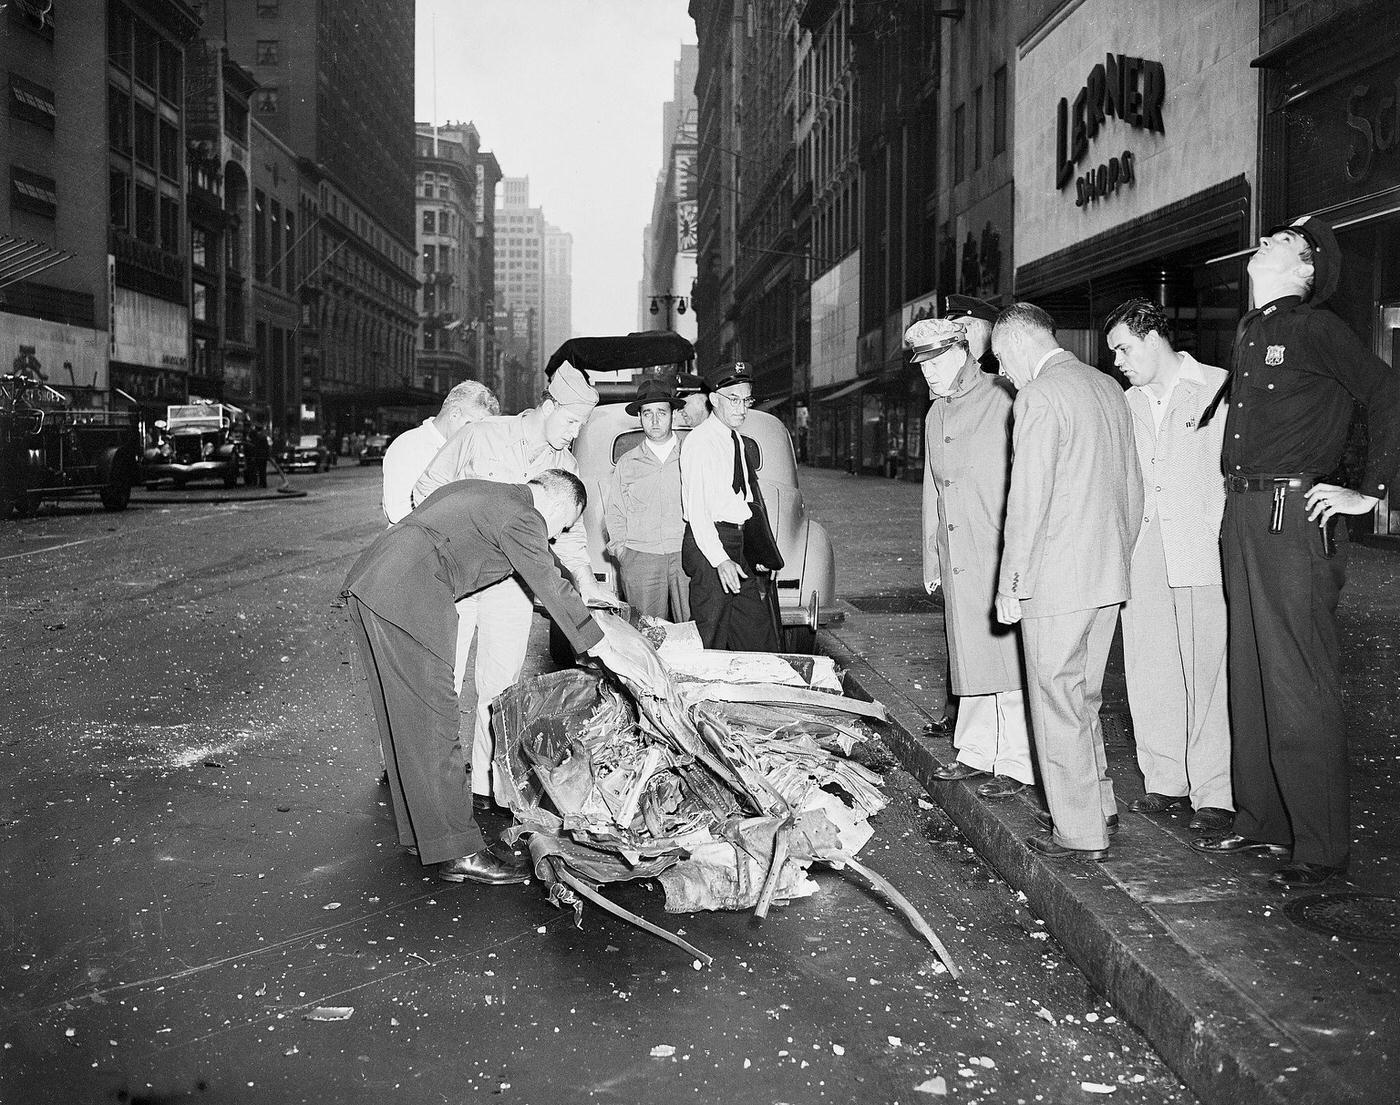 A view of part of the wreckage of the U.S. Army B-25 bombing plane that crashed into the empire state building